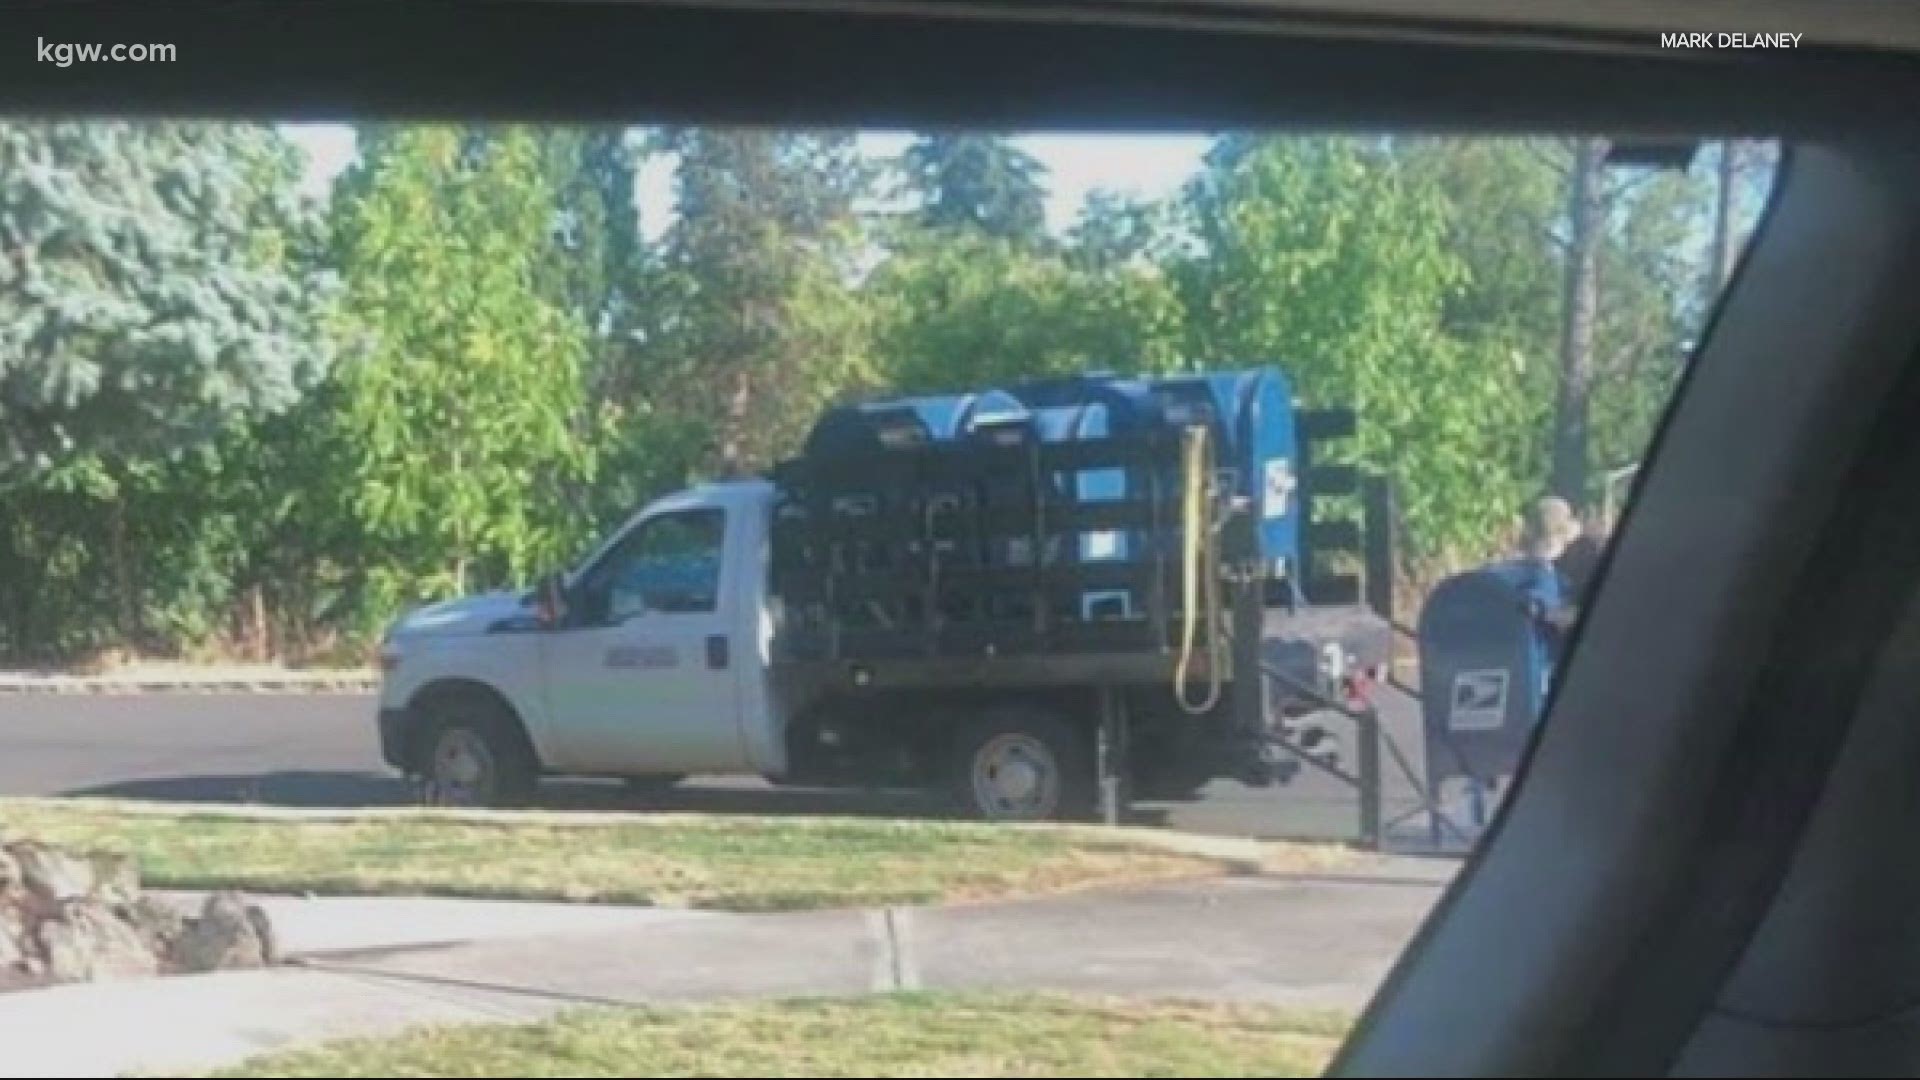 A Northeast Portland resident spotted a worker removing mailboxes earlier this month. USPS confirmed they're removing some mailboxes.